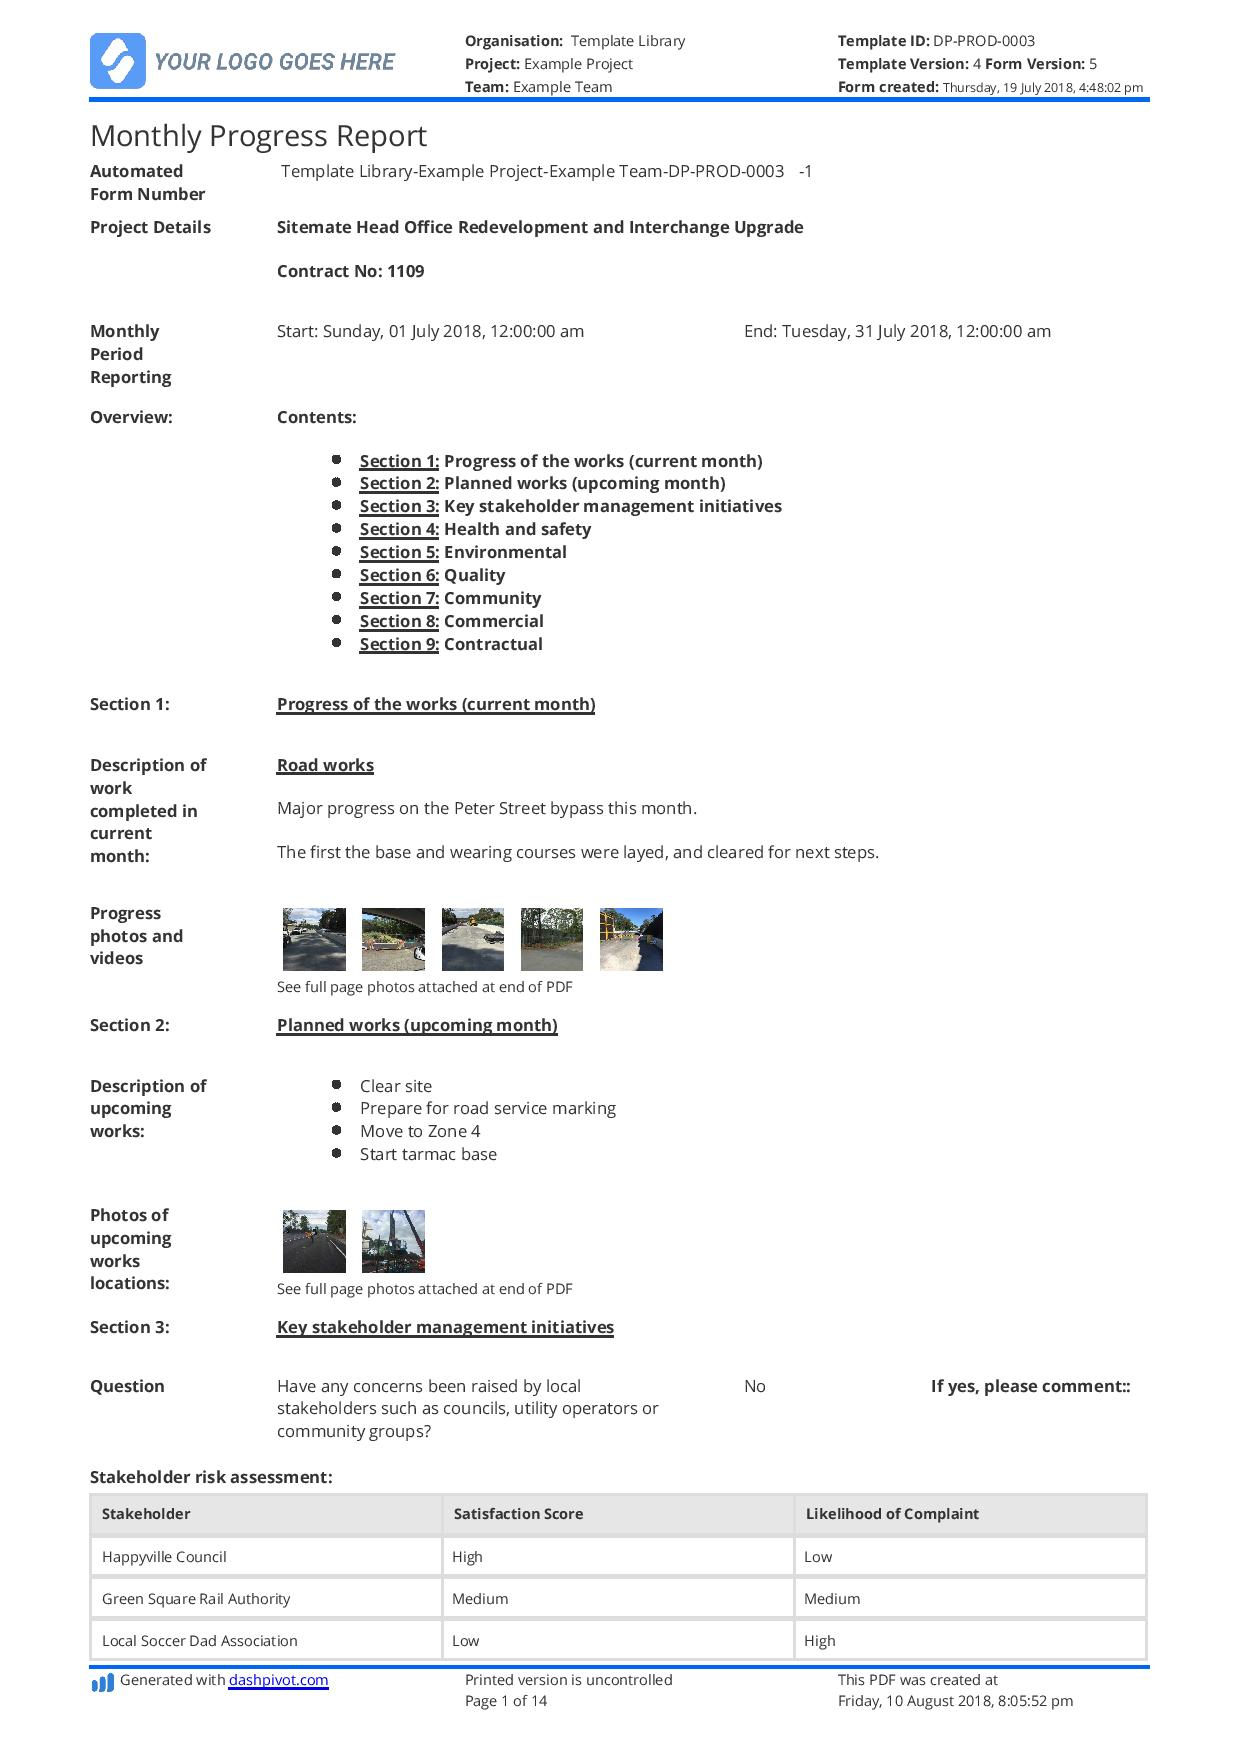 Monthly Construction Progress Report Template: Use This For Monthly Program Report Template